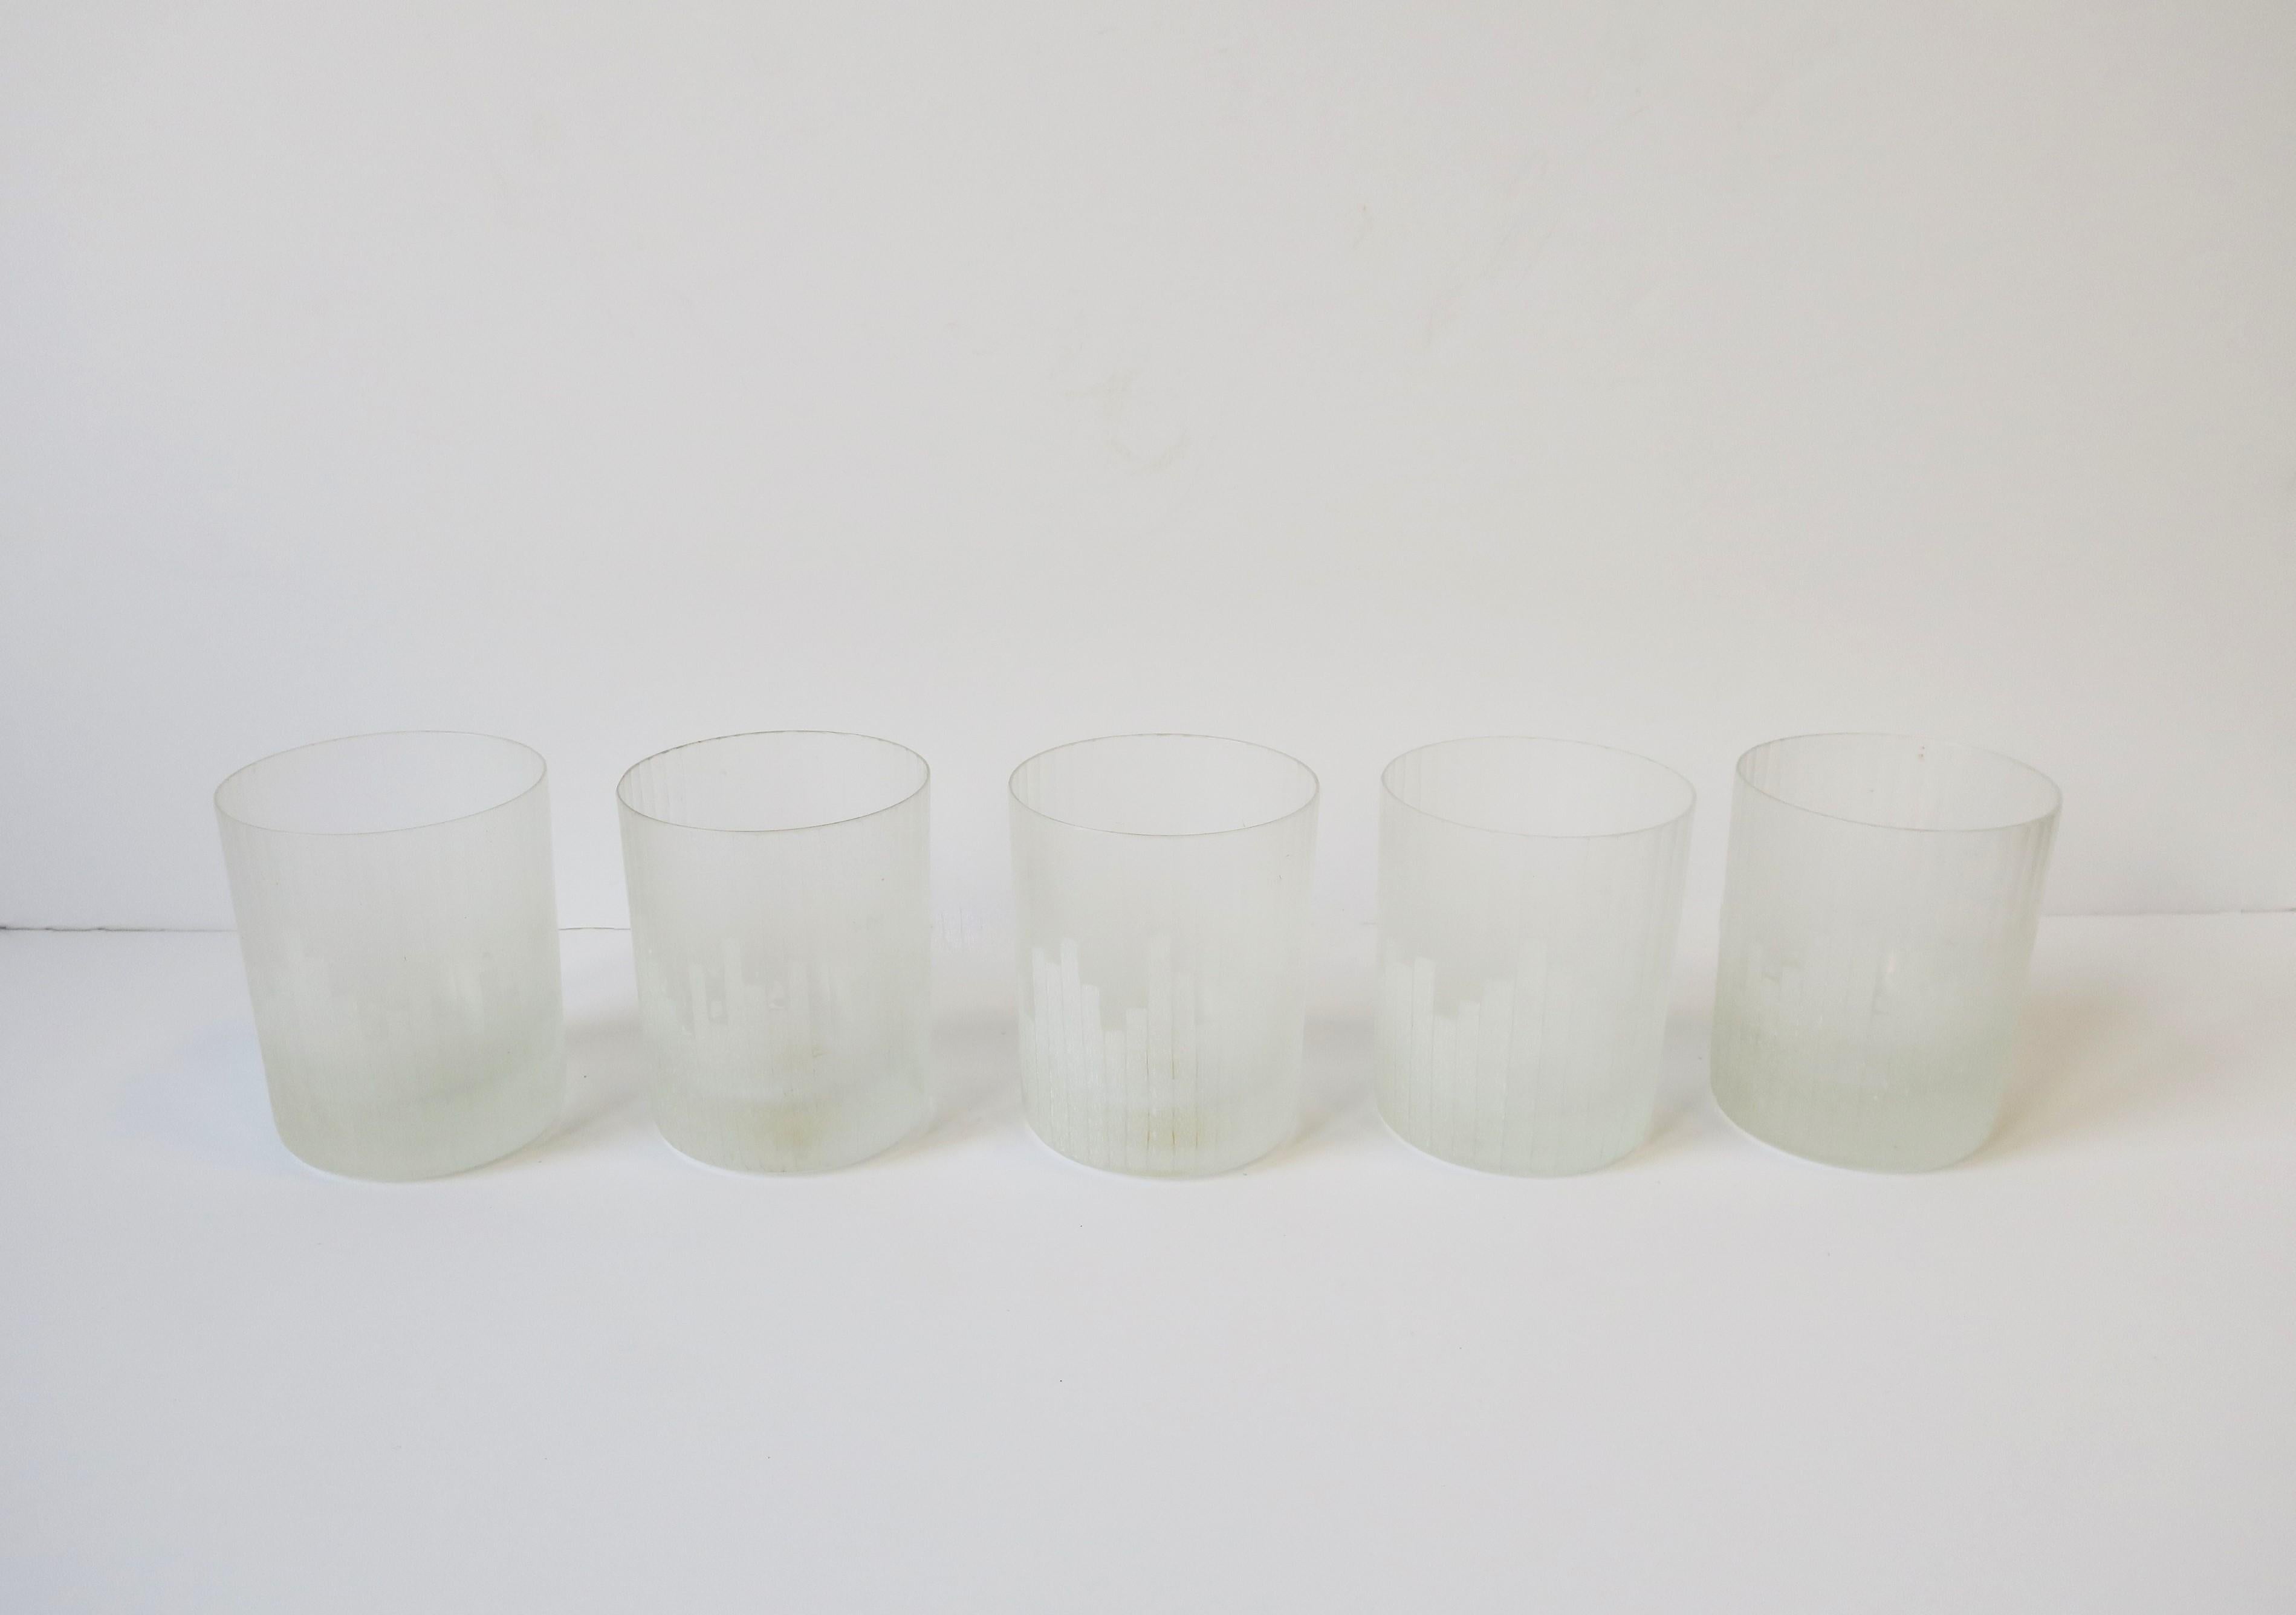 A very beautiful and rare set of five (5) '70s Modern cocktail rocks' glasses by Carl Rotter Lubeck, circa 1970s, late-20th century, West Germany. Glasses have a Modern/Art Deco cityscape design on a matte white glass with fluted design. A great set